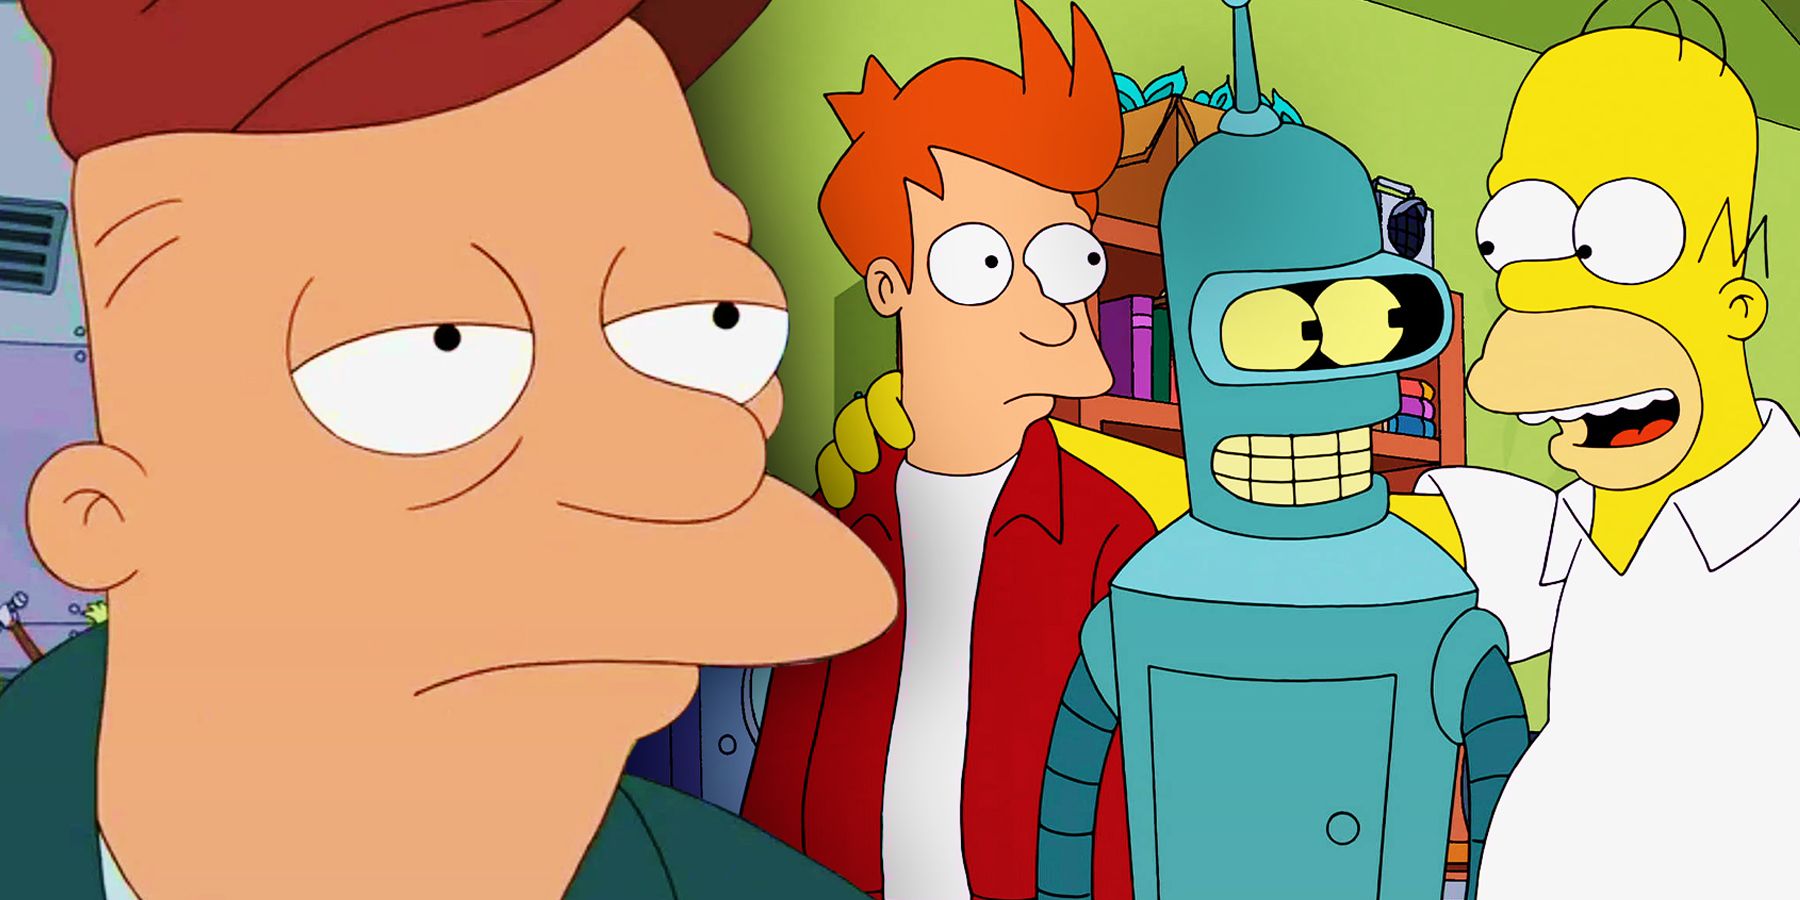 On the left, Scruffy looks depressed without his mustache. On the right, Homer Simpson puts his arm around Bender and Fry, who look puzzled.